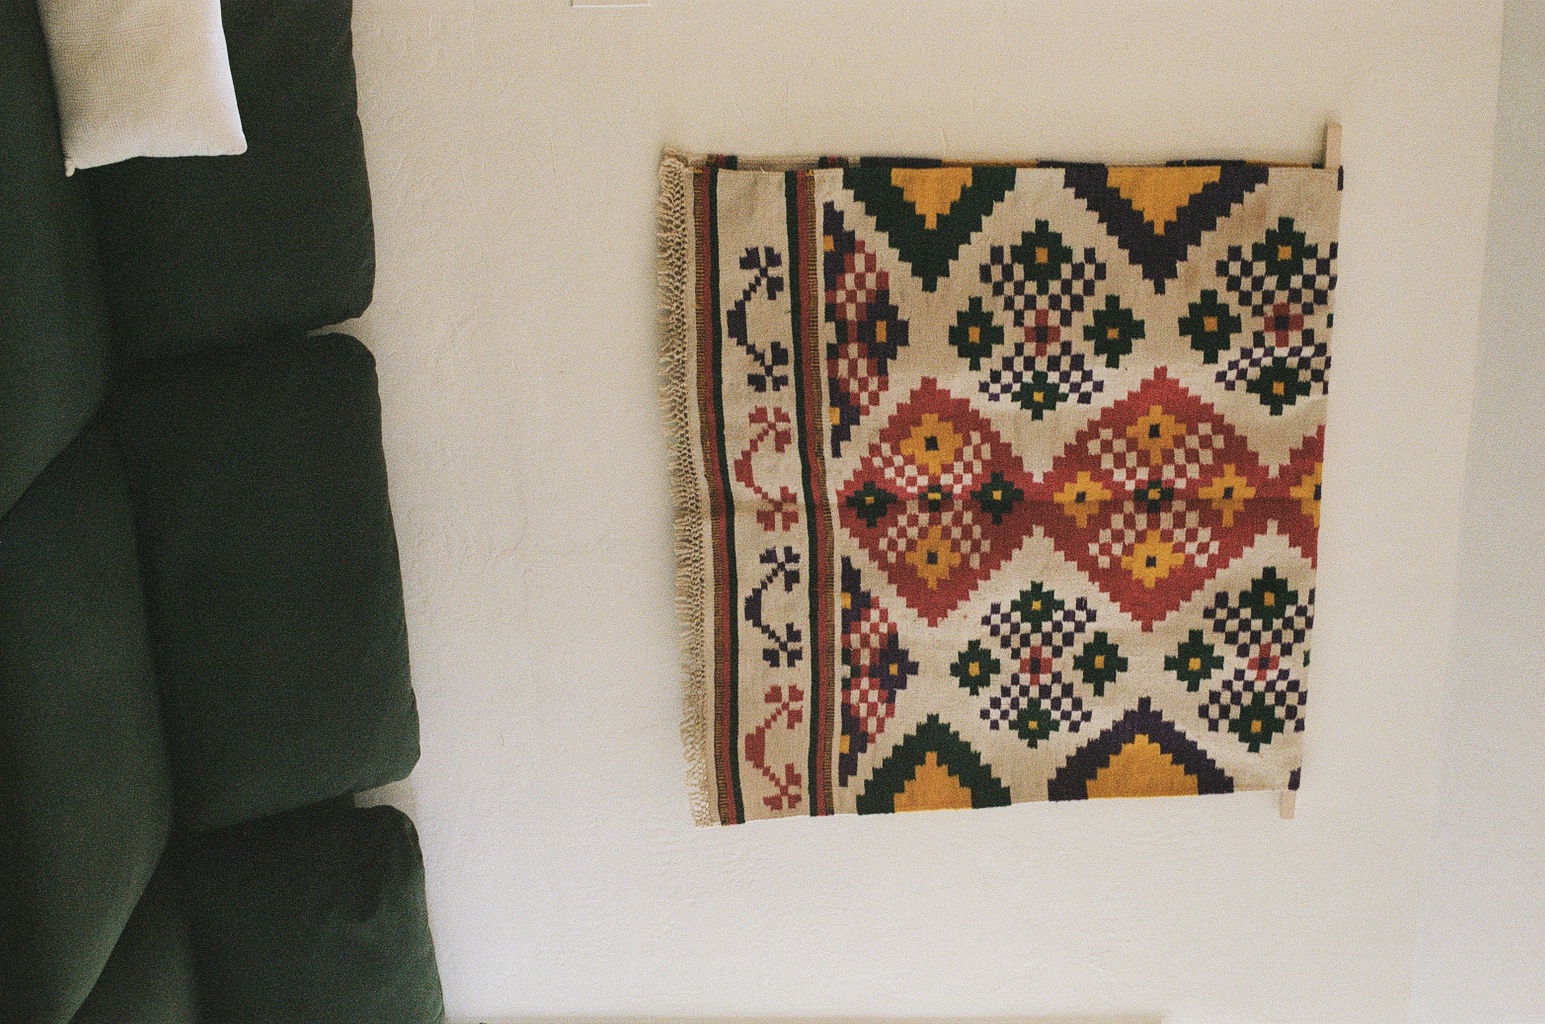 A dhurrie made by Rupy C. Tut's grandmother